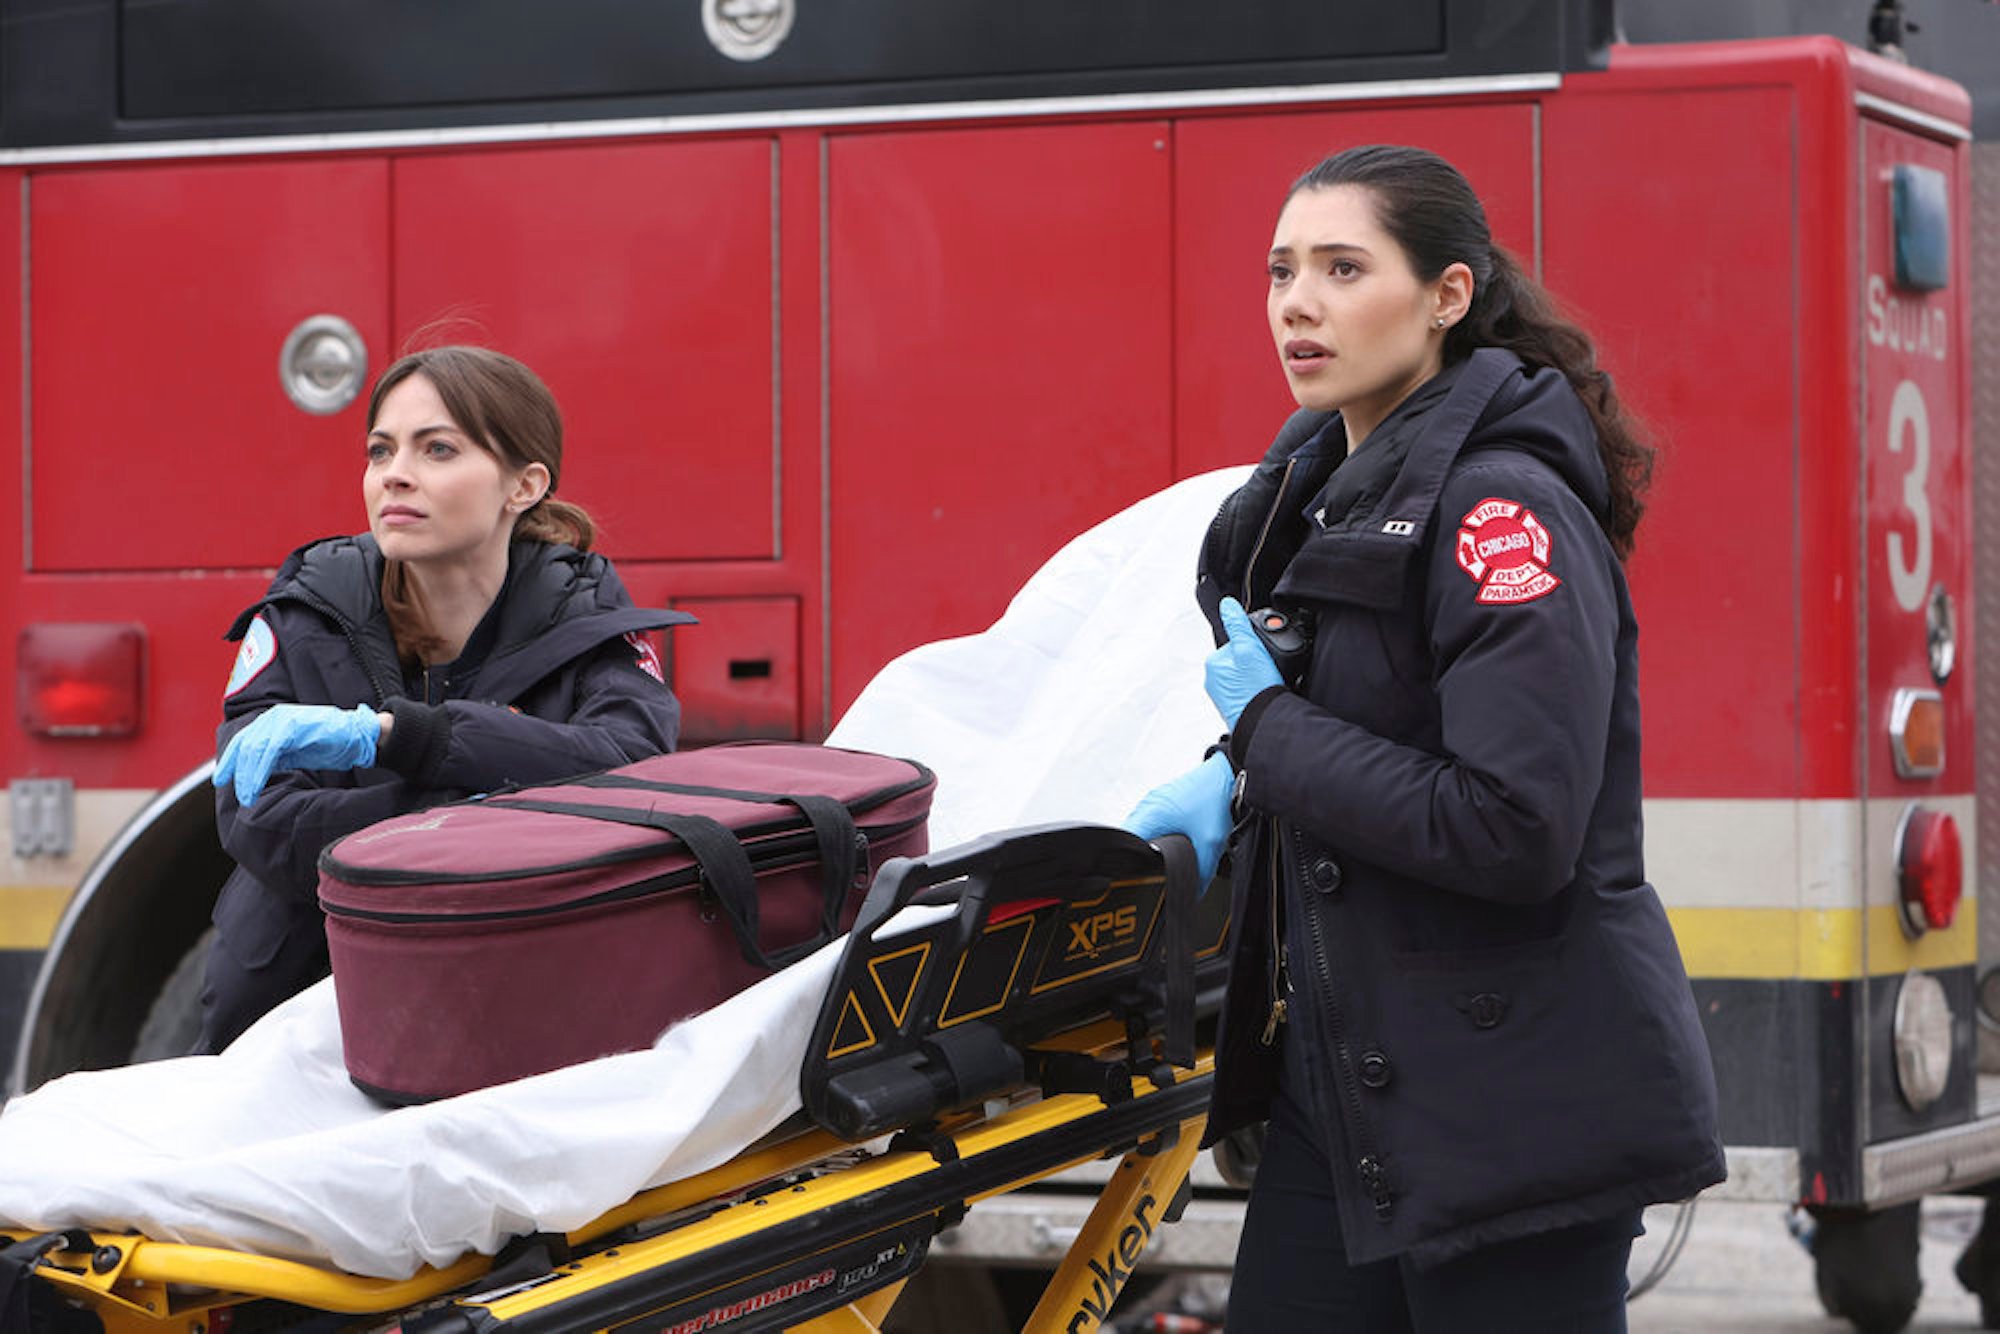 Emma Jacobs and Violet Mikami working together in 'Chicago Fire' Season 10 Episode 20